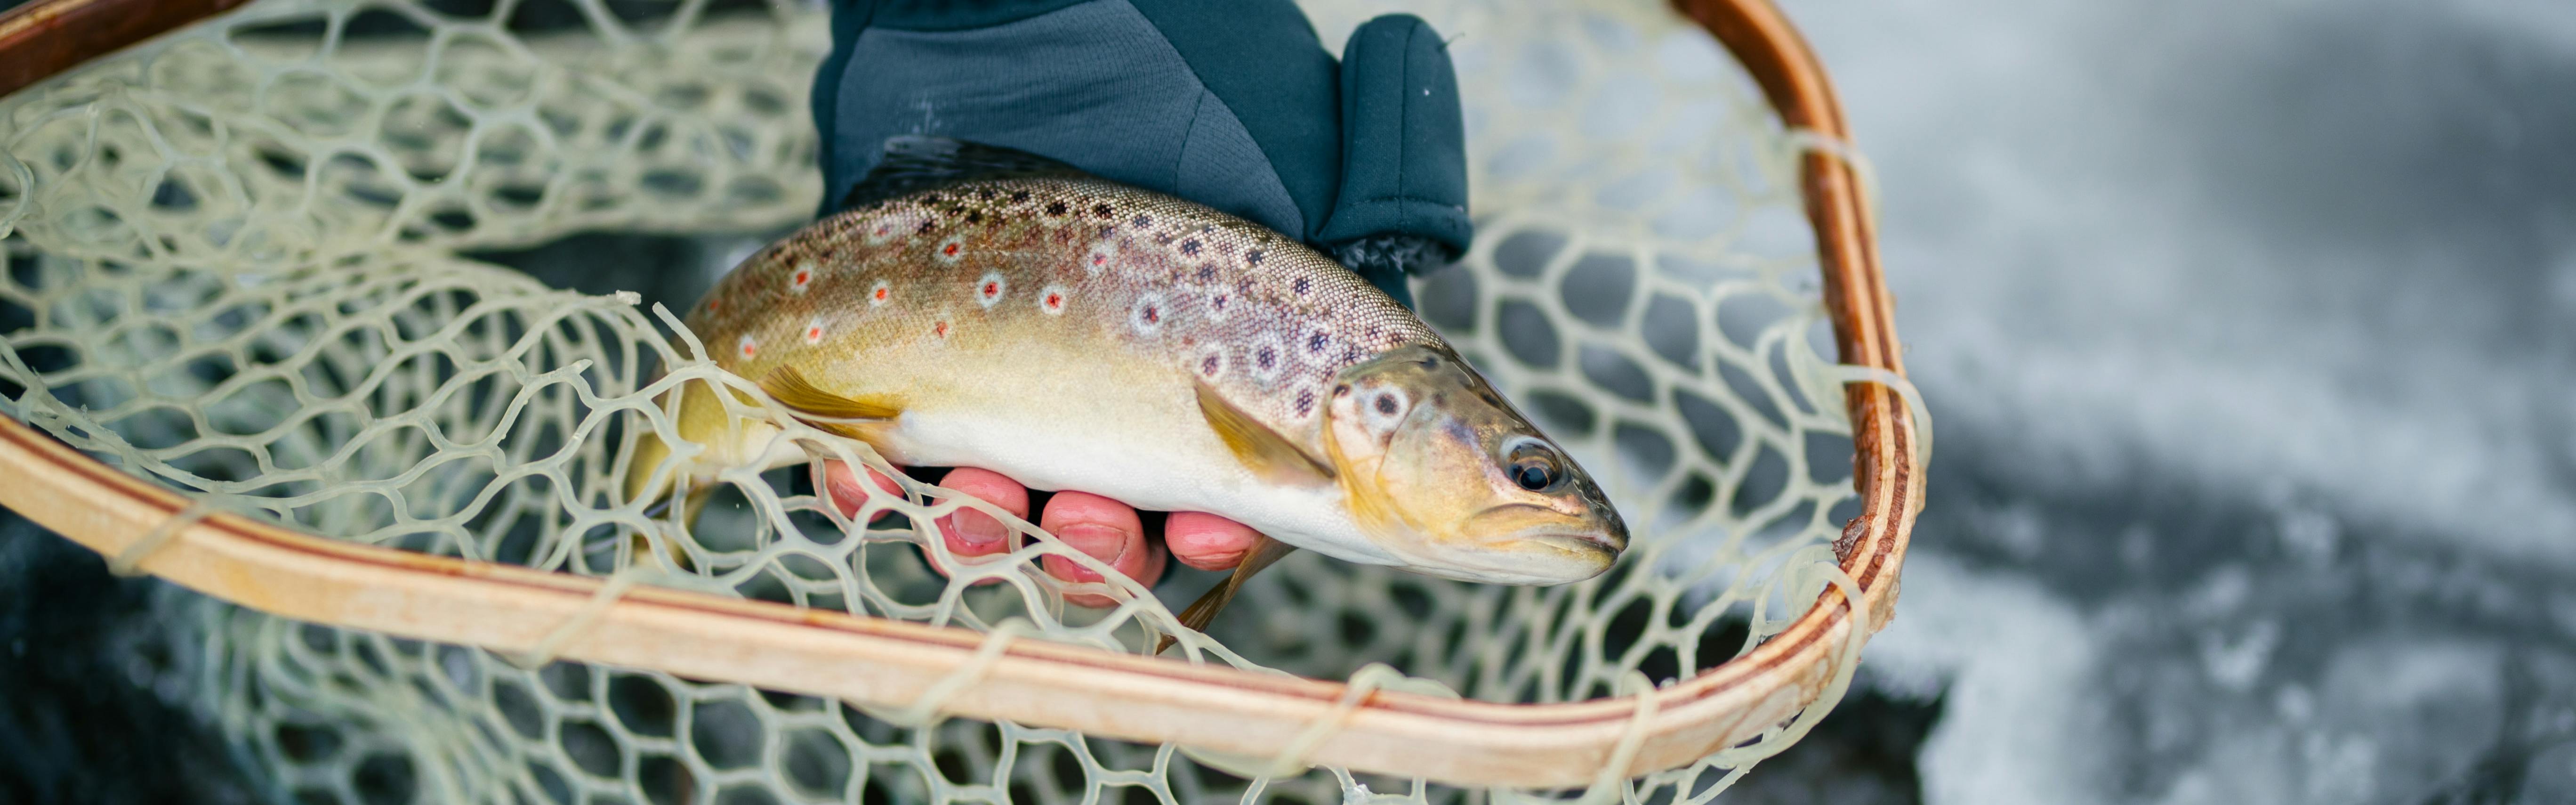 Everything You Need for a Day of Fly Fishing